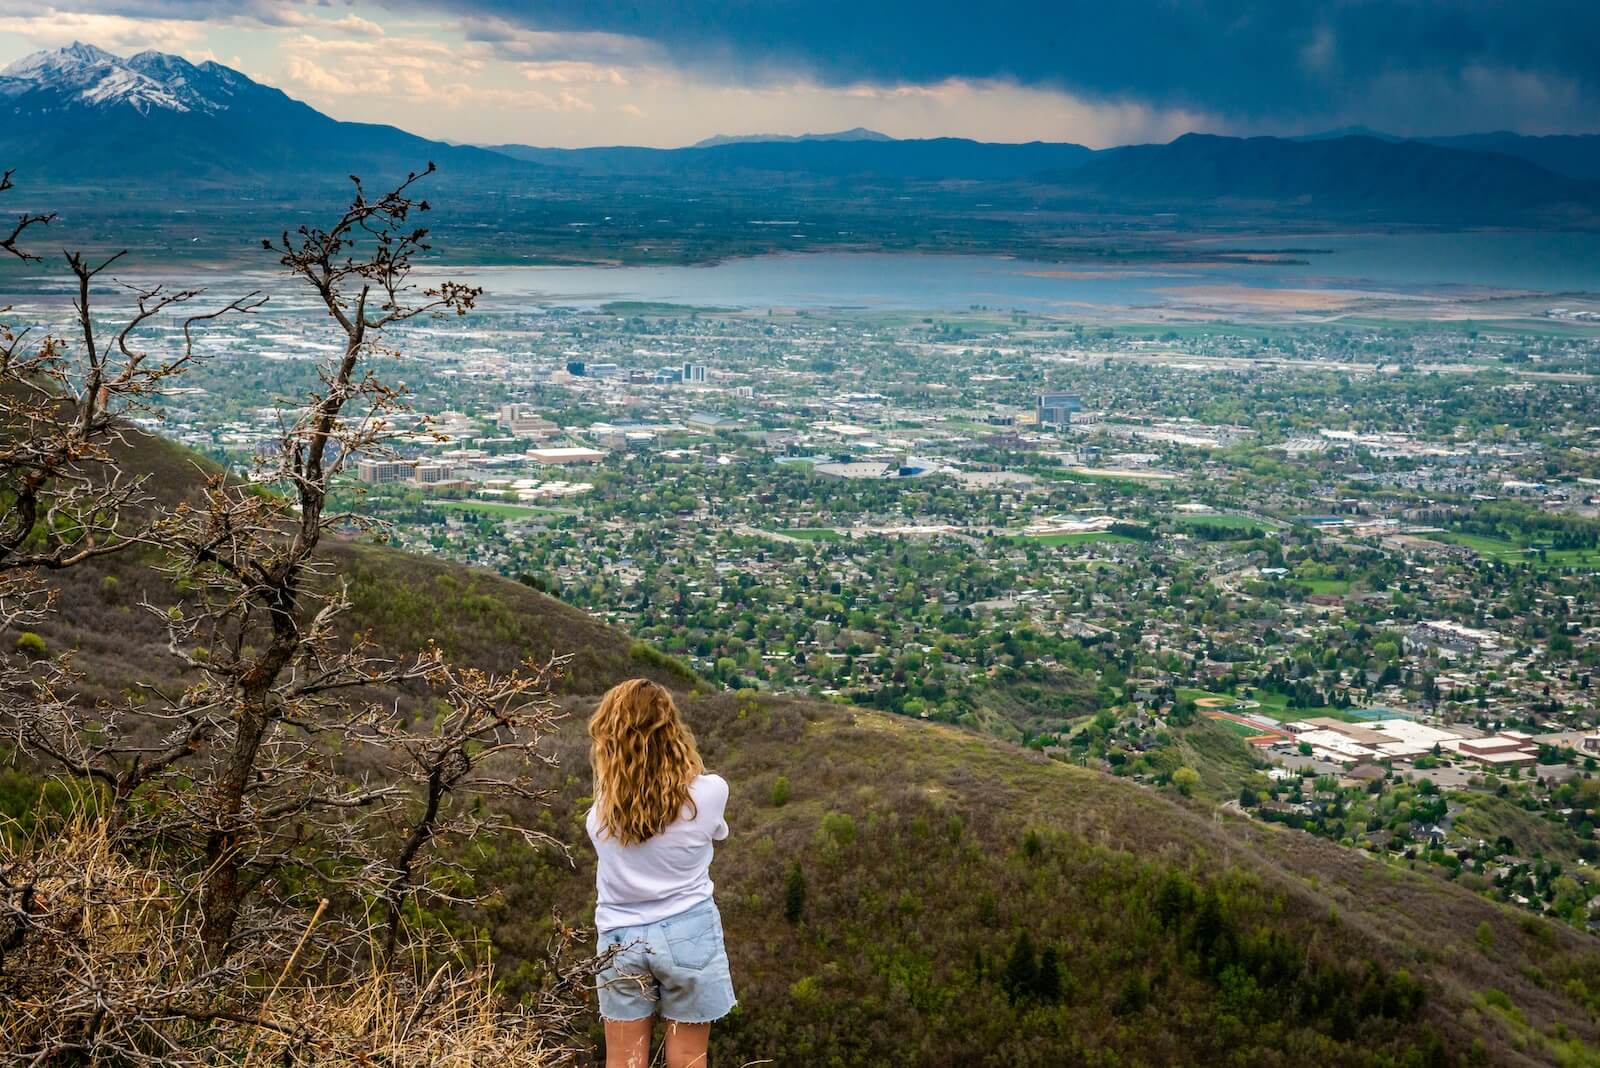 A woman overlooking Provo, Utah from high up